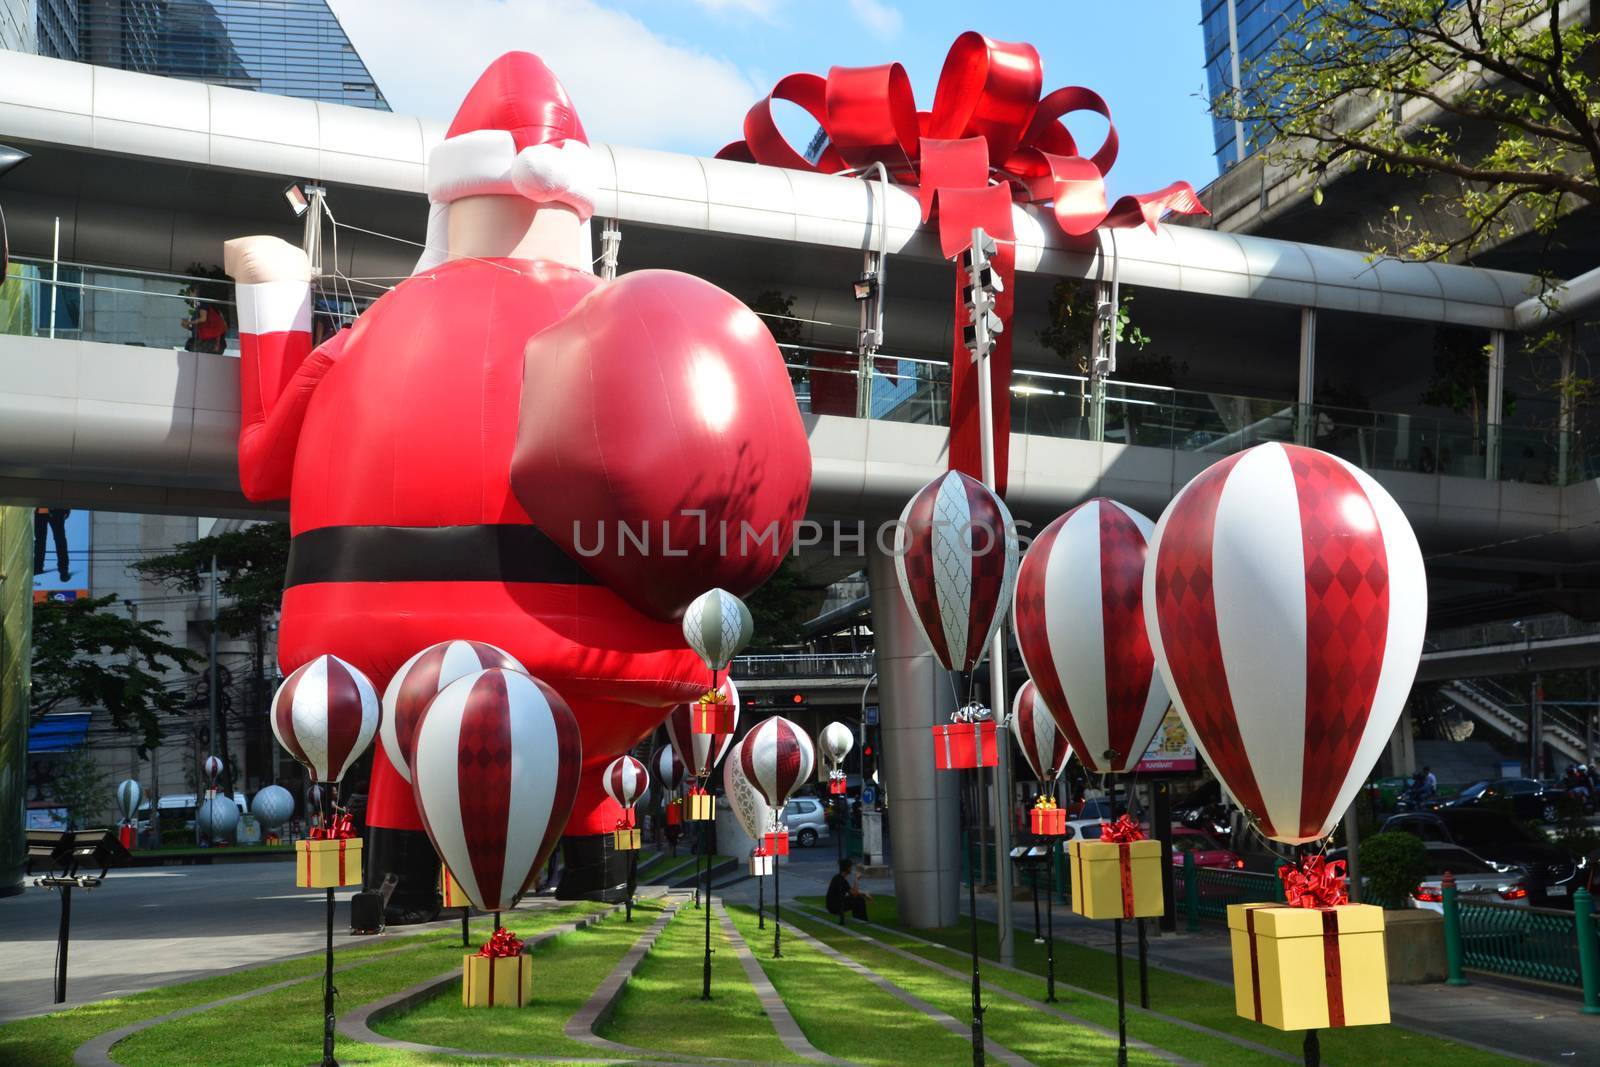 The Biggest Santa Claus in South East Asia  by ideation90